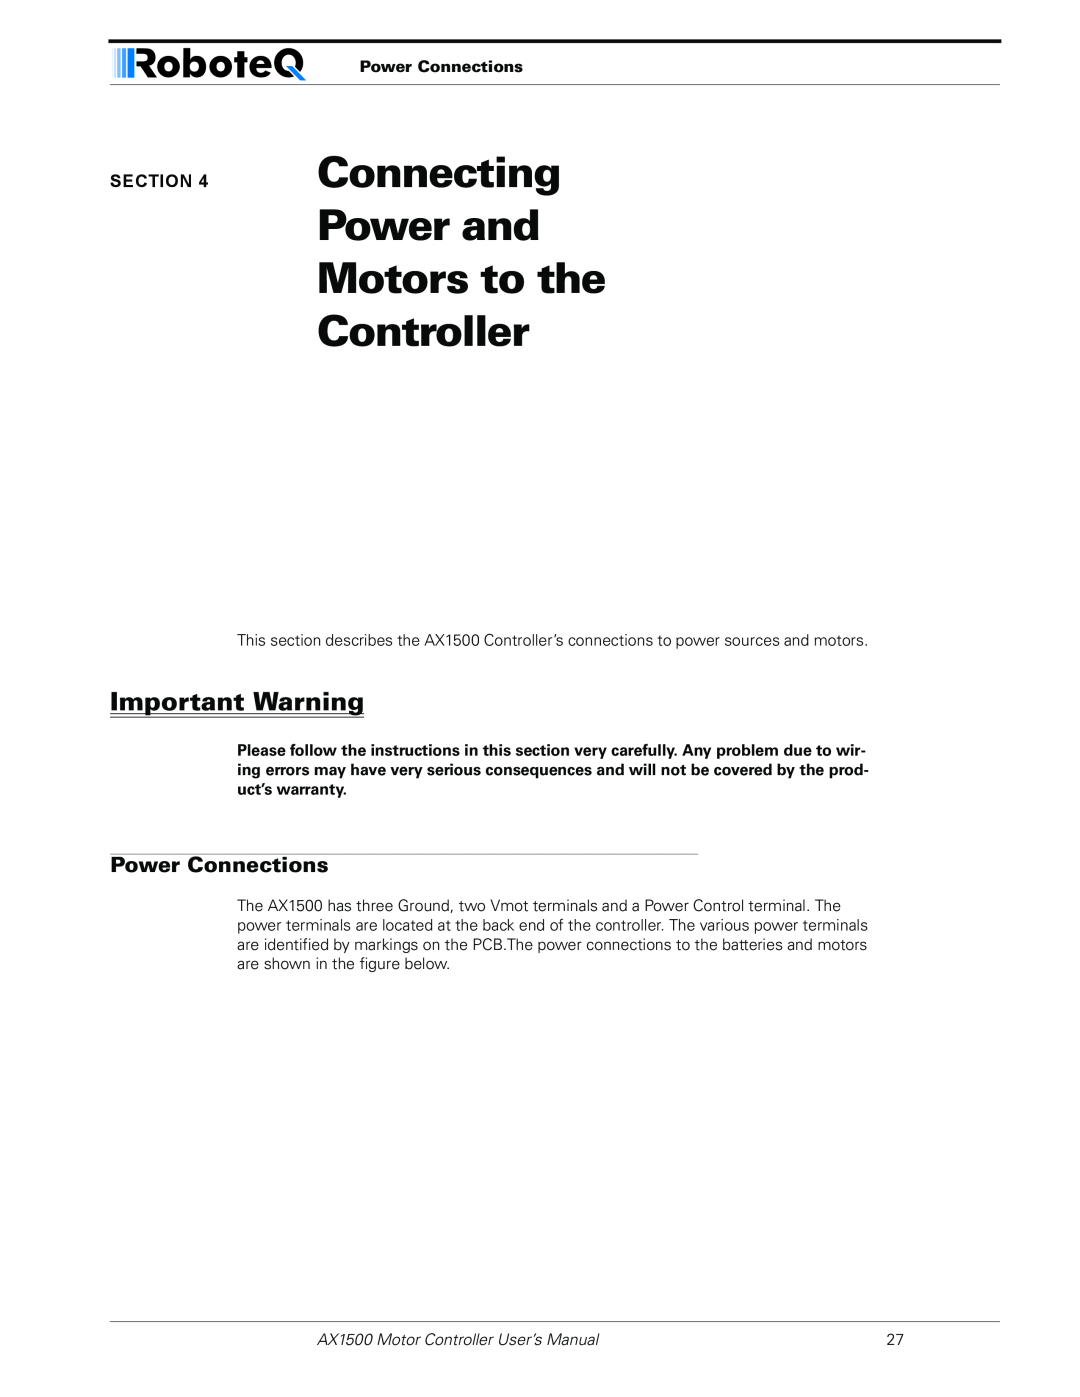 RoboteQ AX1500, AX2550 user manual Connecting Power and Motors to the Controller, Power Connections, Important Warning 